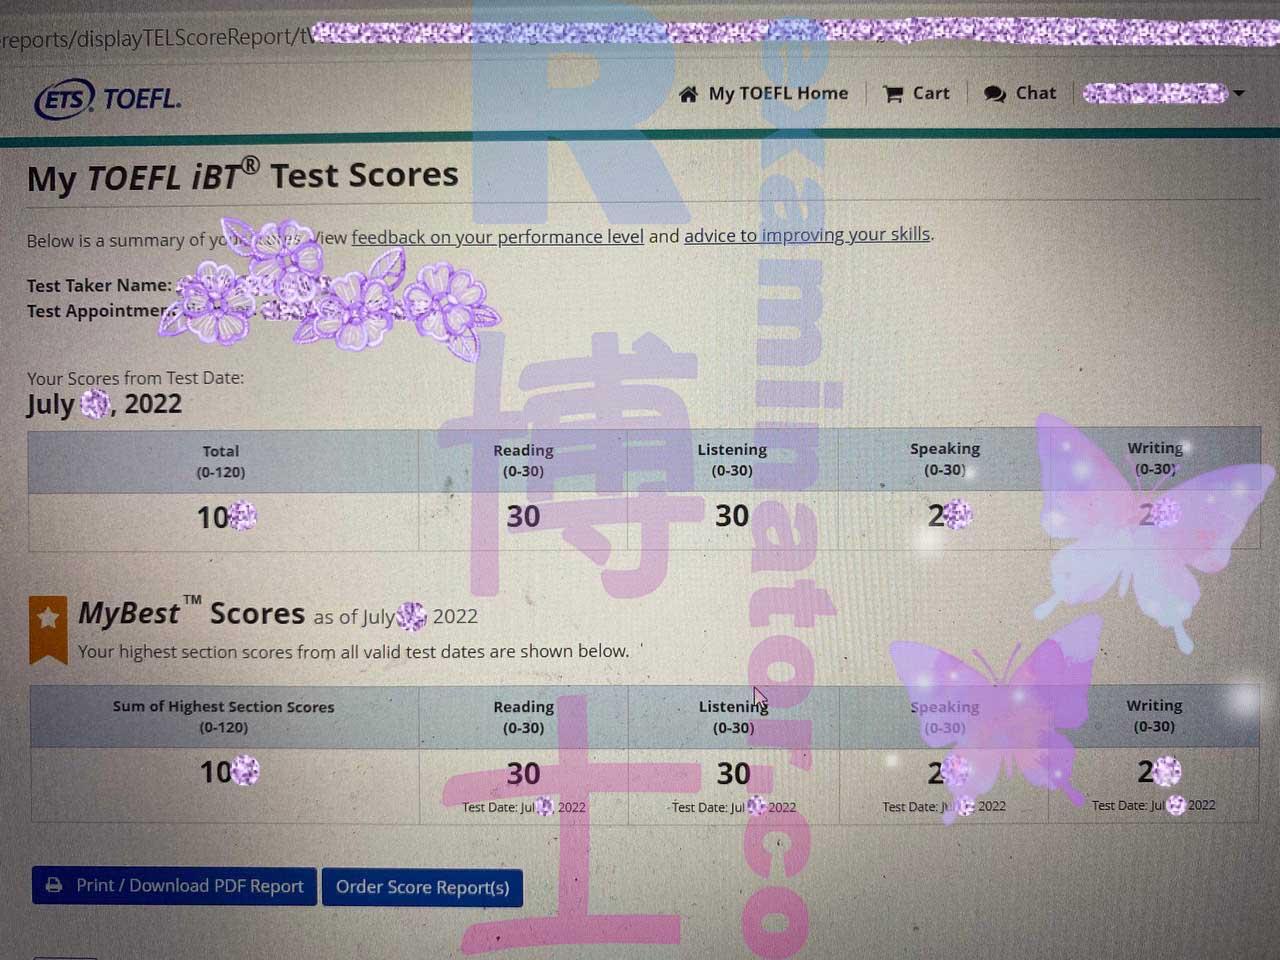 Official TOEFL scores in! Double 30s on Reading and Listening! Taiwanese customer typed really slow and missed huge chunks of essays. Otherwise the writing score would have been much higher. She will need help with her SAT next😎